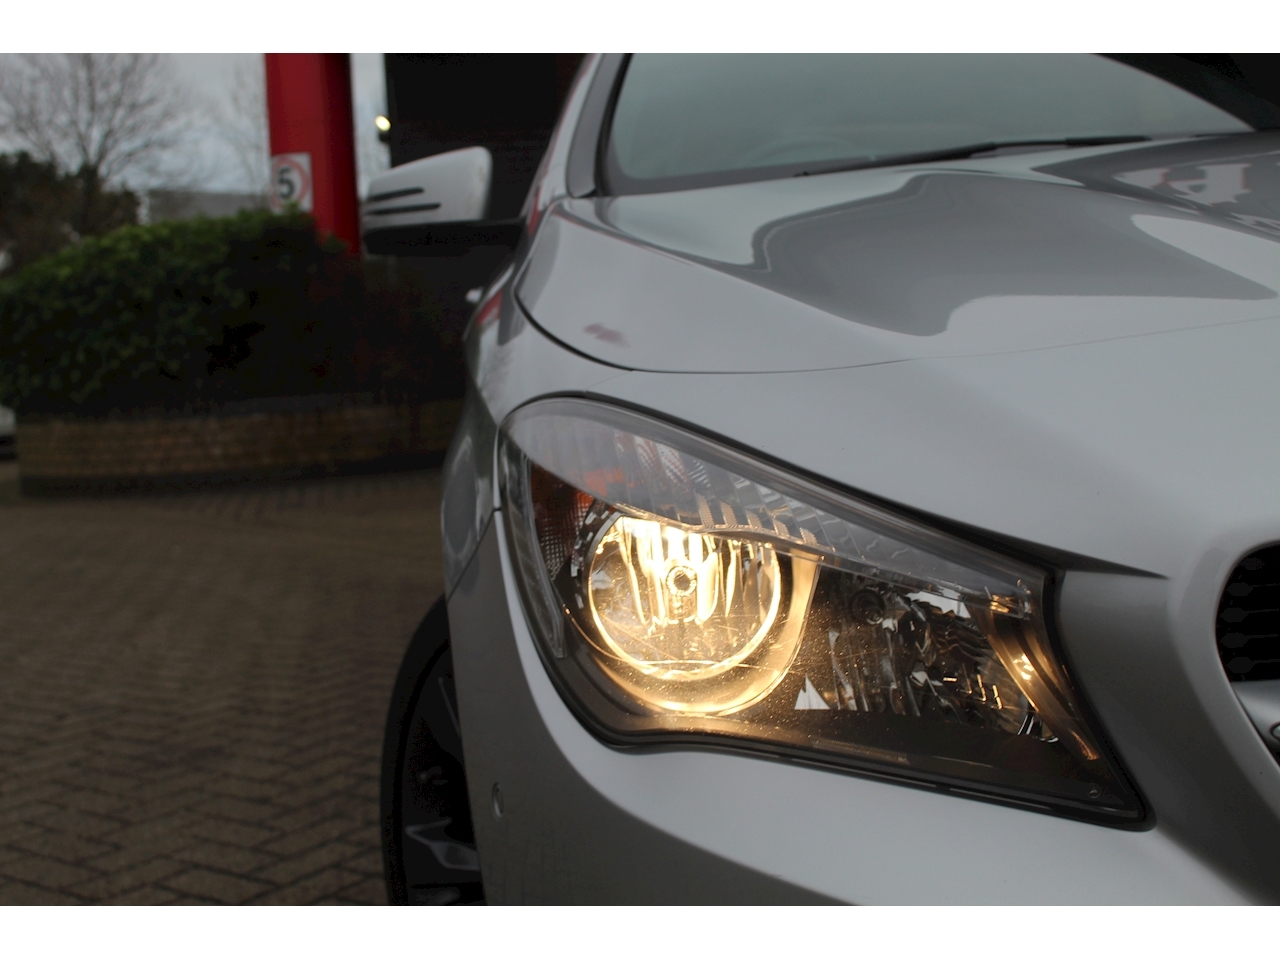 2.1 CLA220 CDI Sport Coupe 4dr Diesel 7G-DCT (s/s) (111 g/km, 170 bhp)